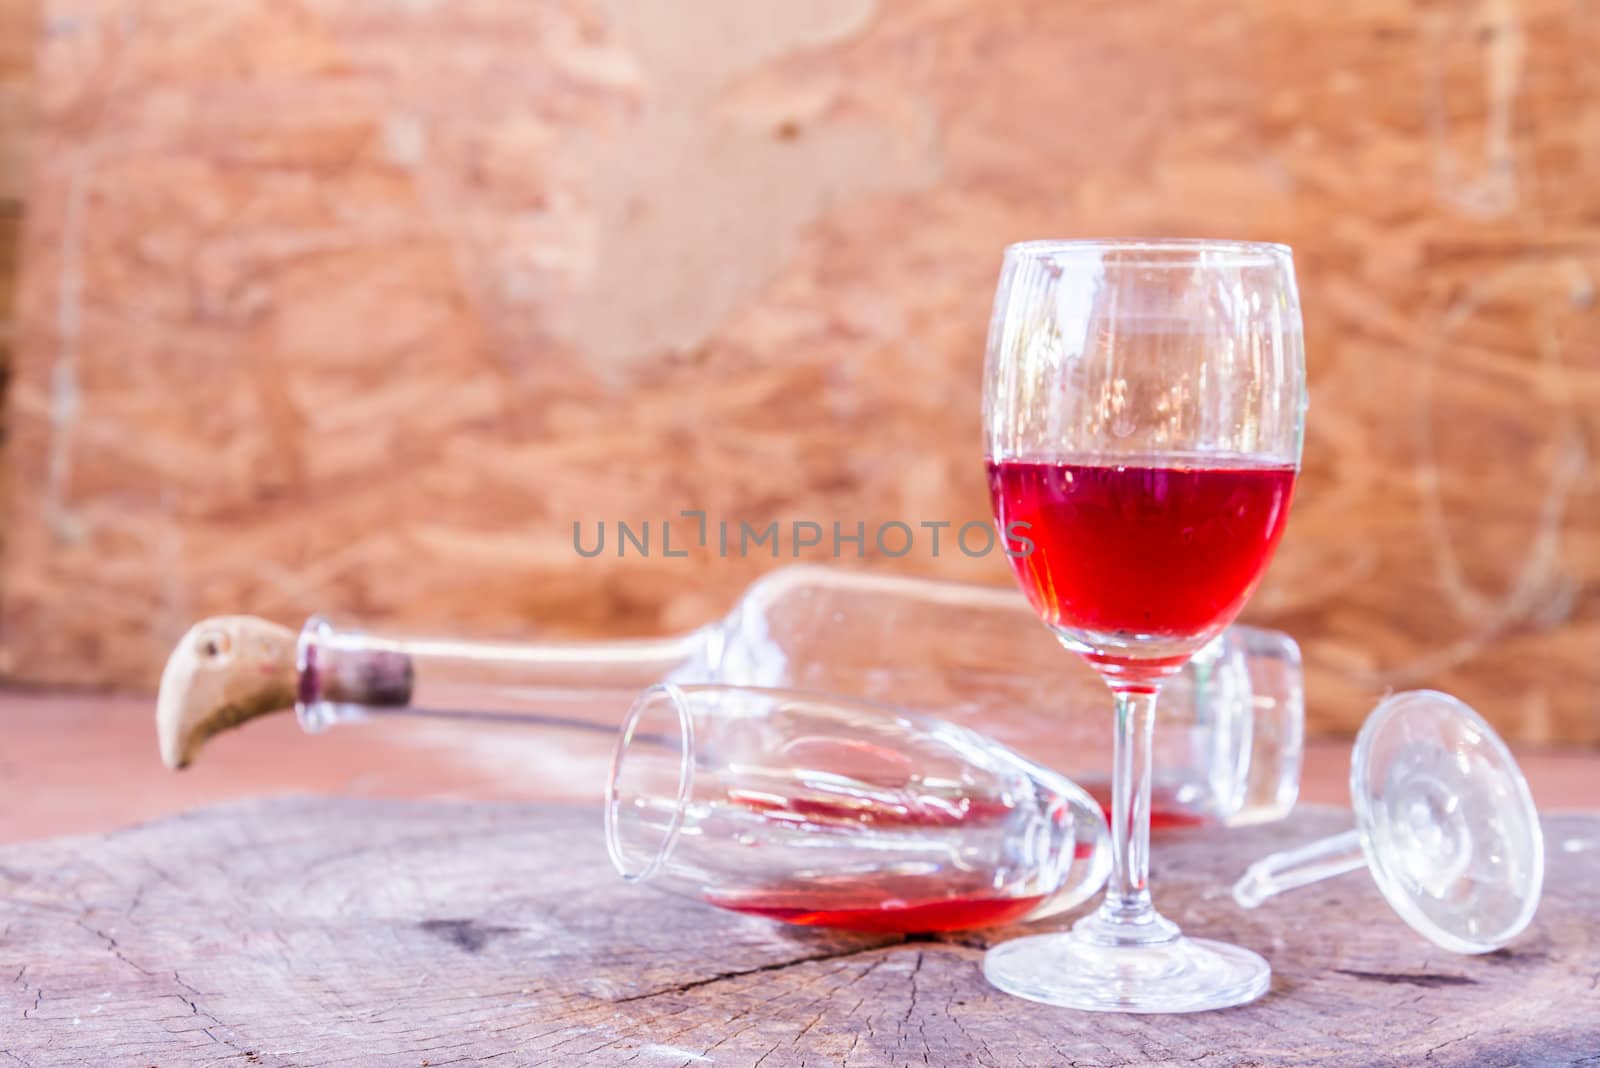 red wine on wooden background still life image by wmitrmatr